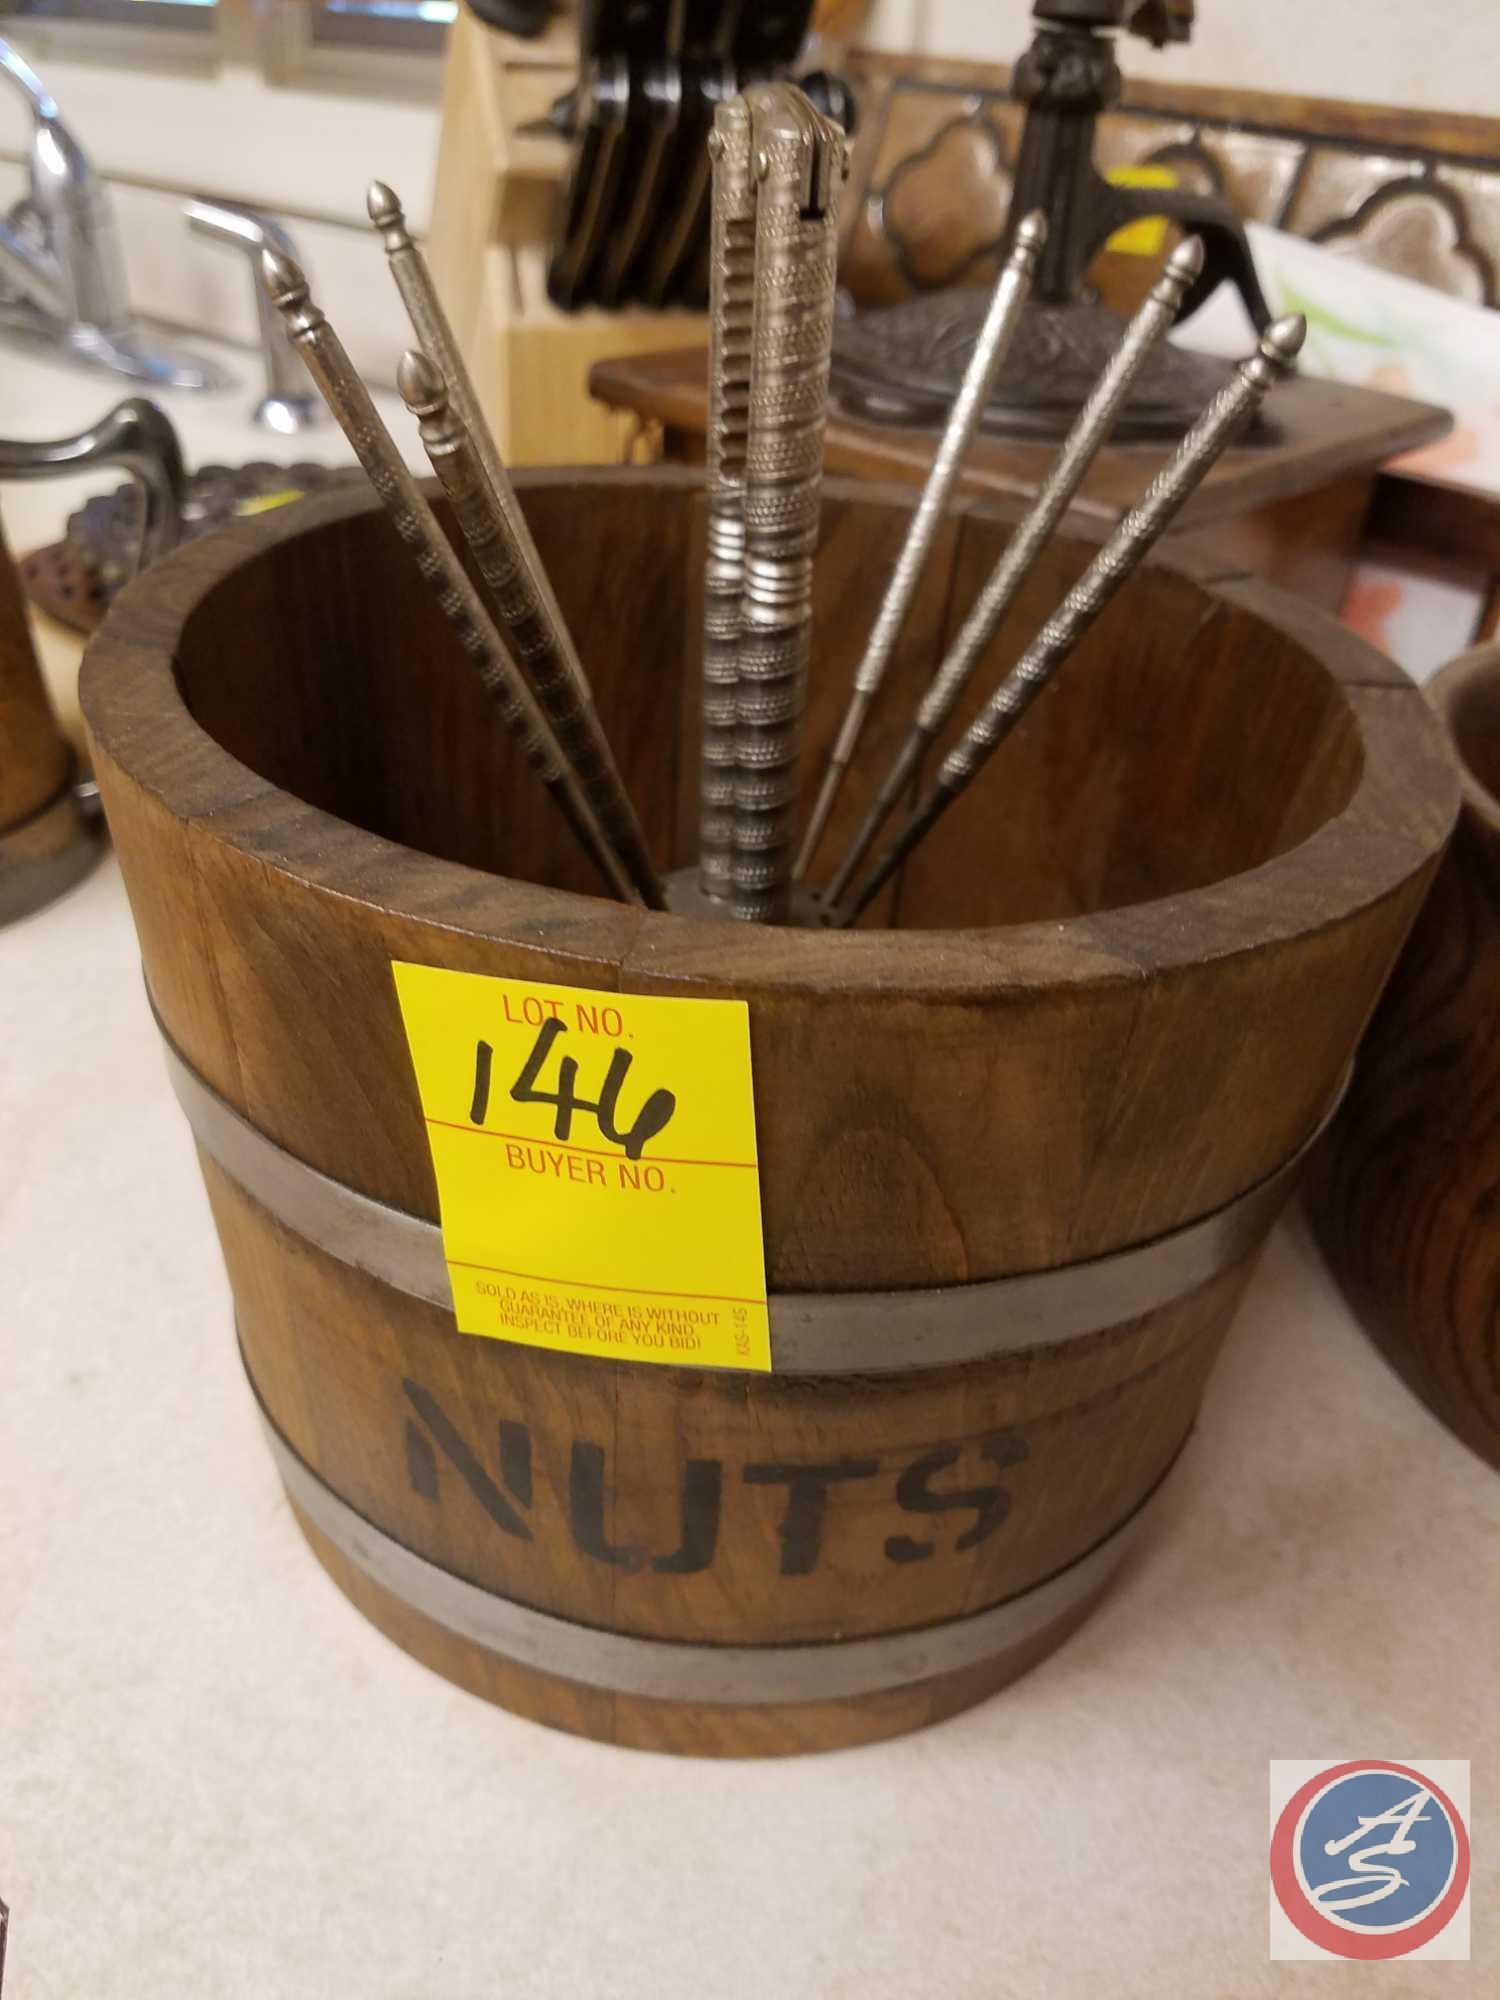 Wooden "Nuts" Bowl with Nut Crackers, Wooden Bowl, Wooden/Metal Cup, Napkin Holder, Knife Set in